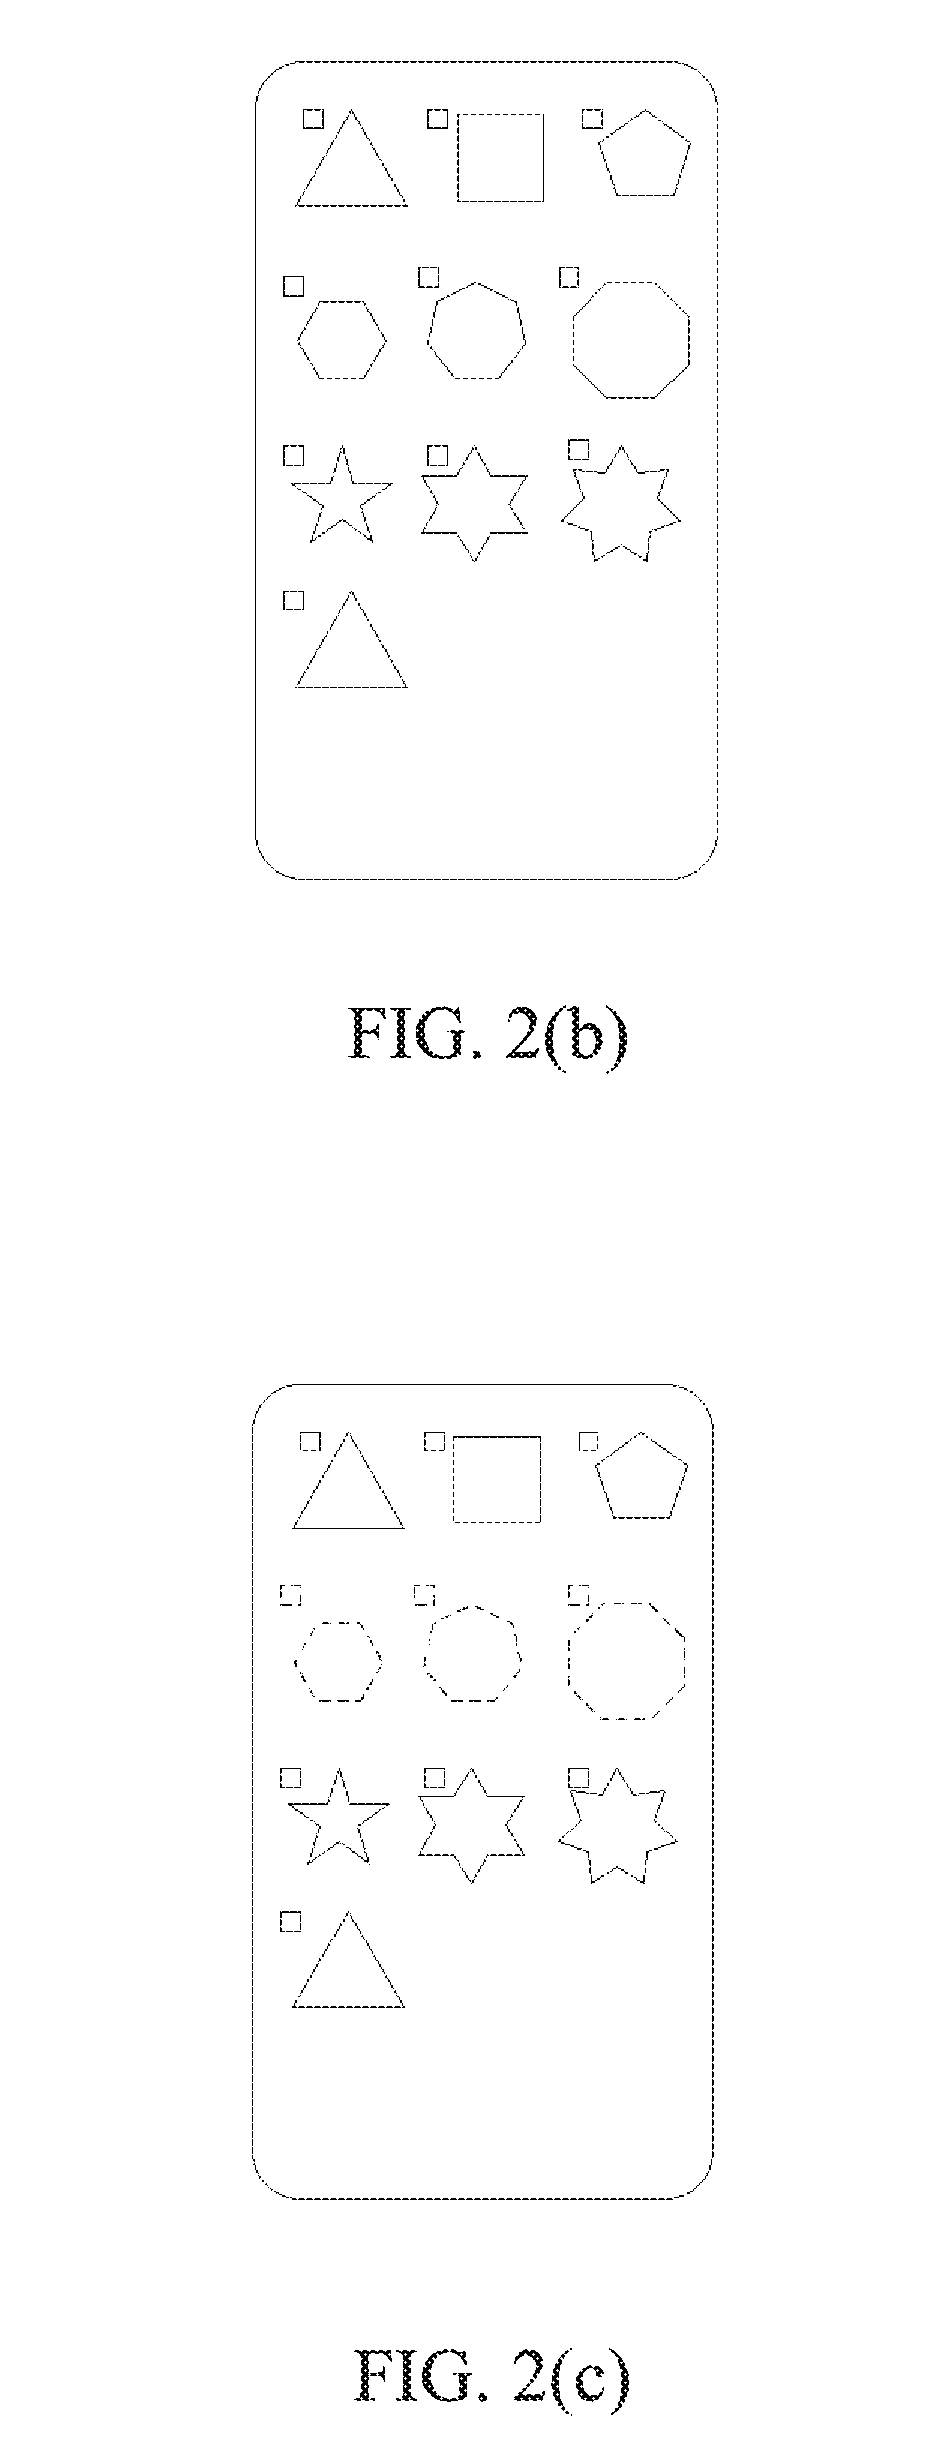 Method for performing batch management on desktop icon and digital mobile device